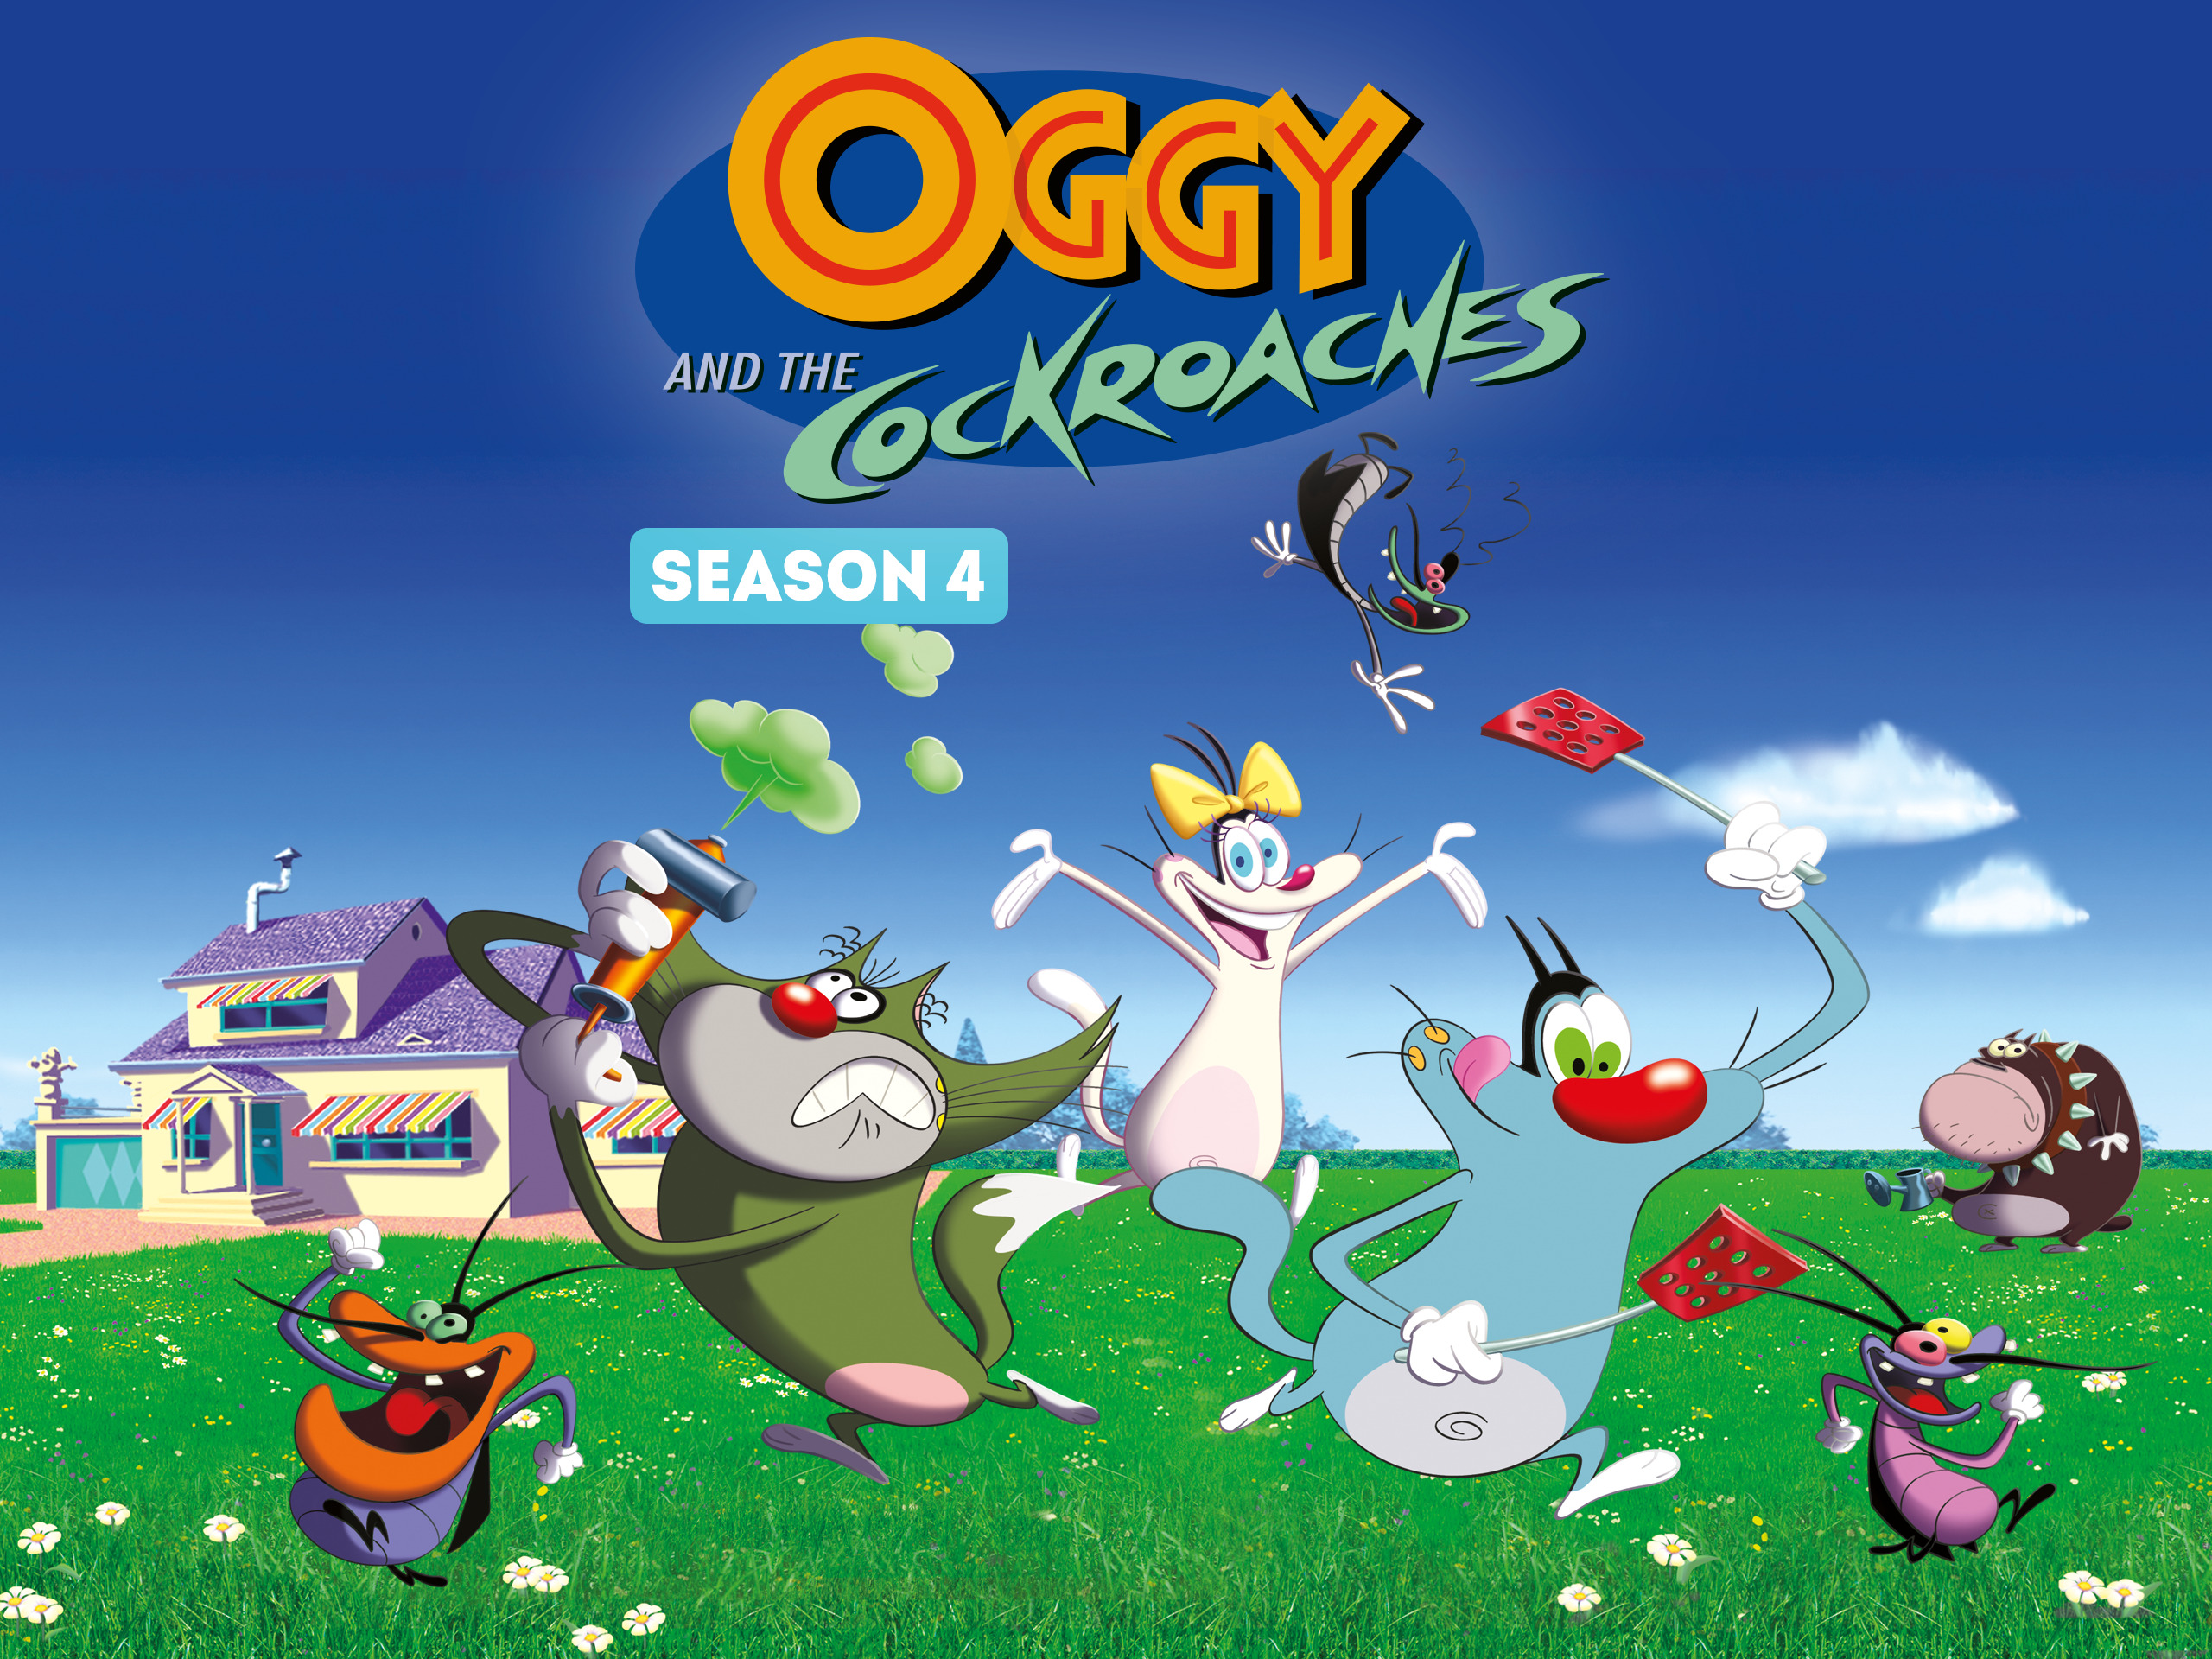 oggy and crocoches